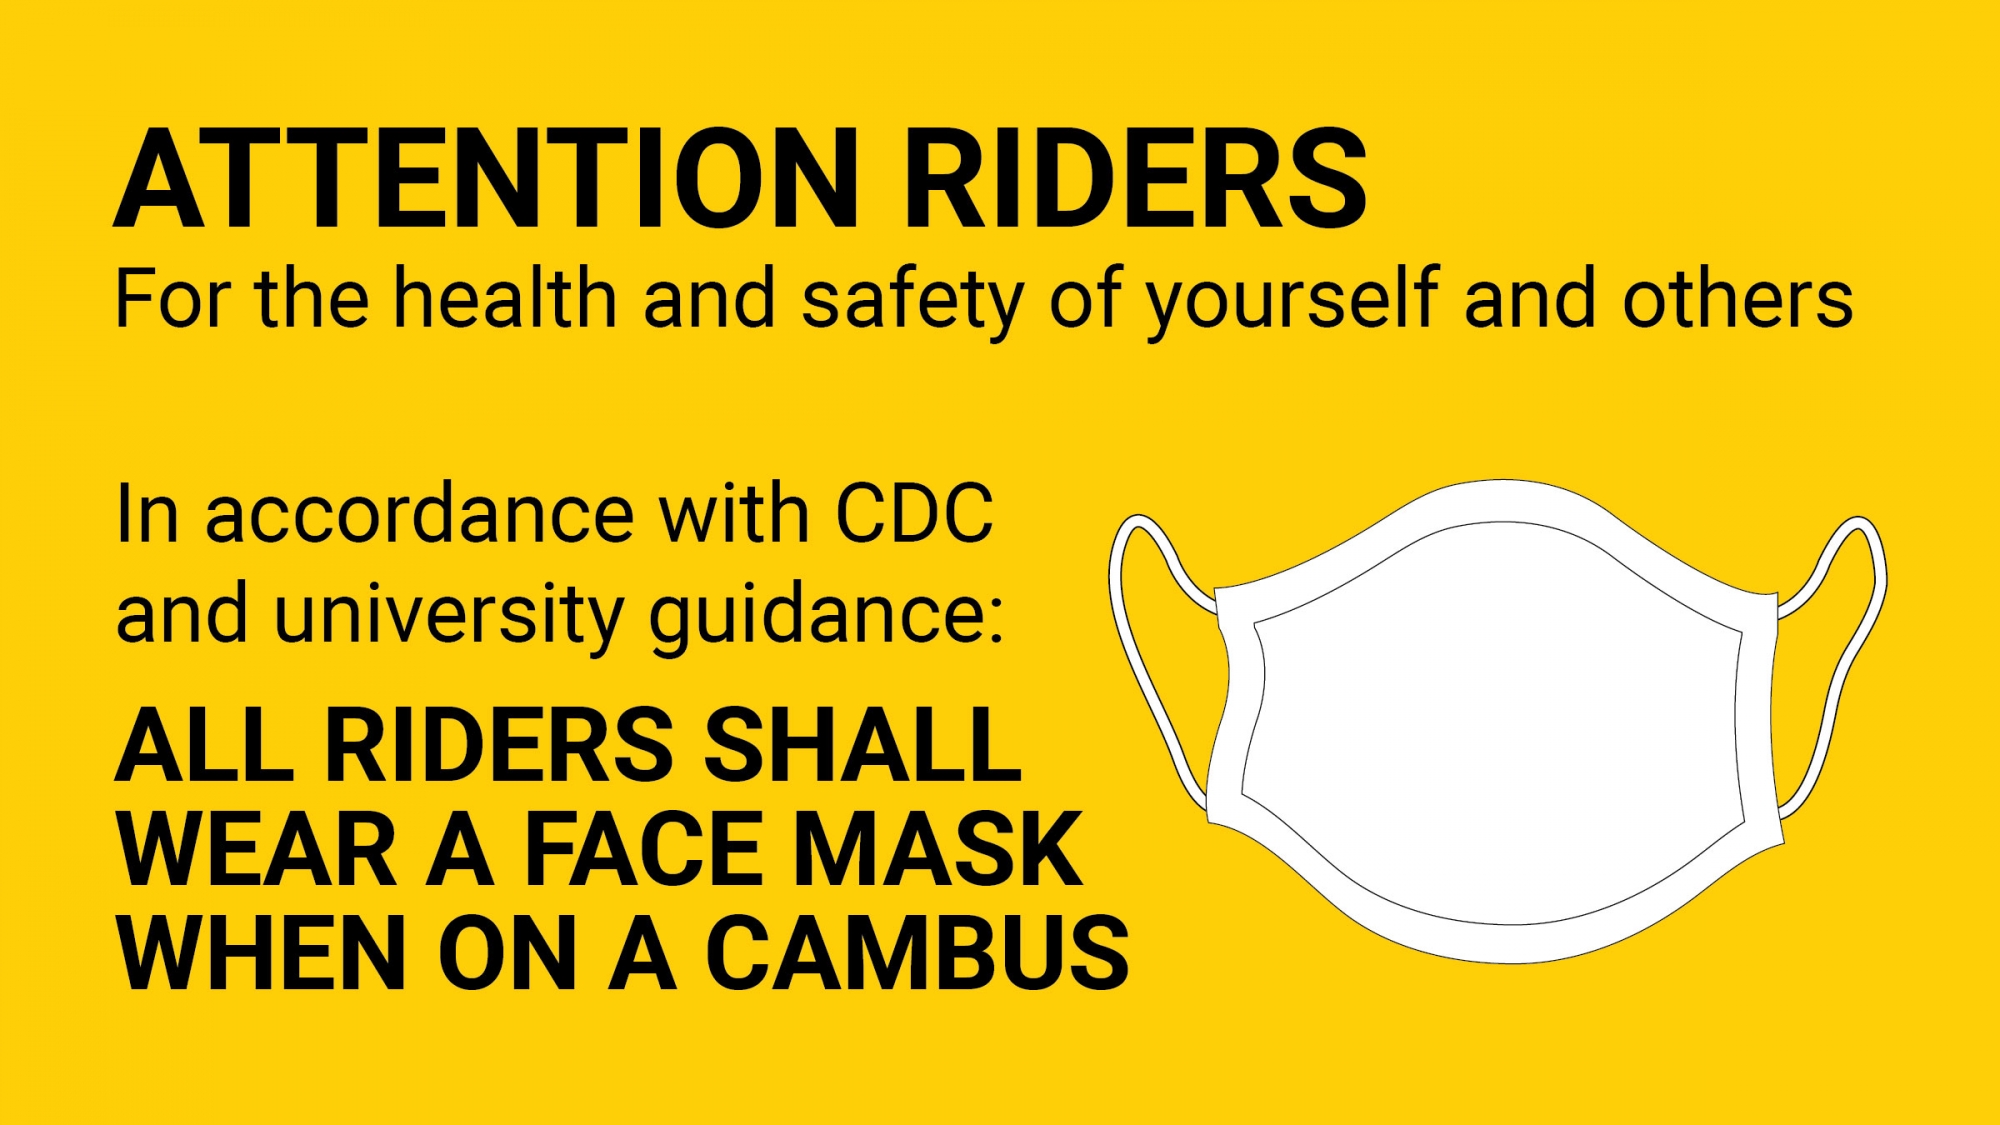 Riders shall wear a mask when on Cambus